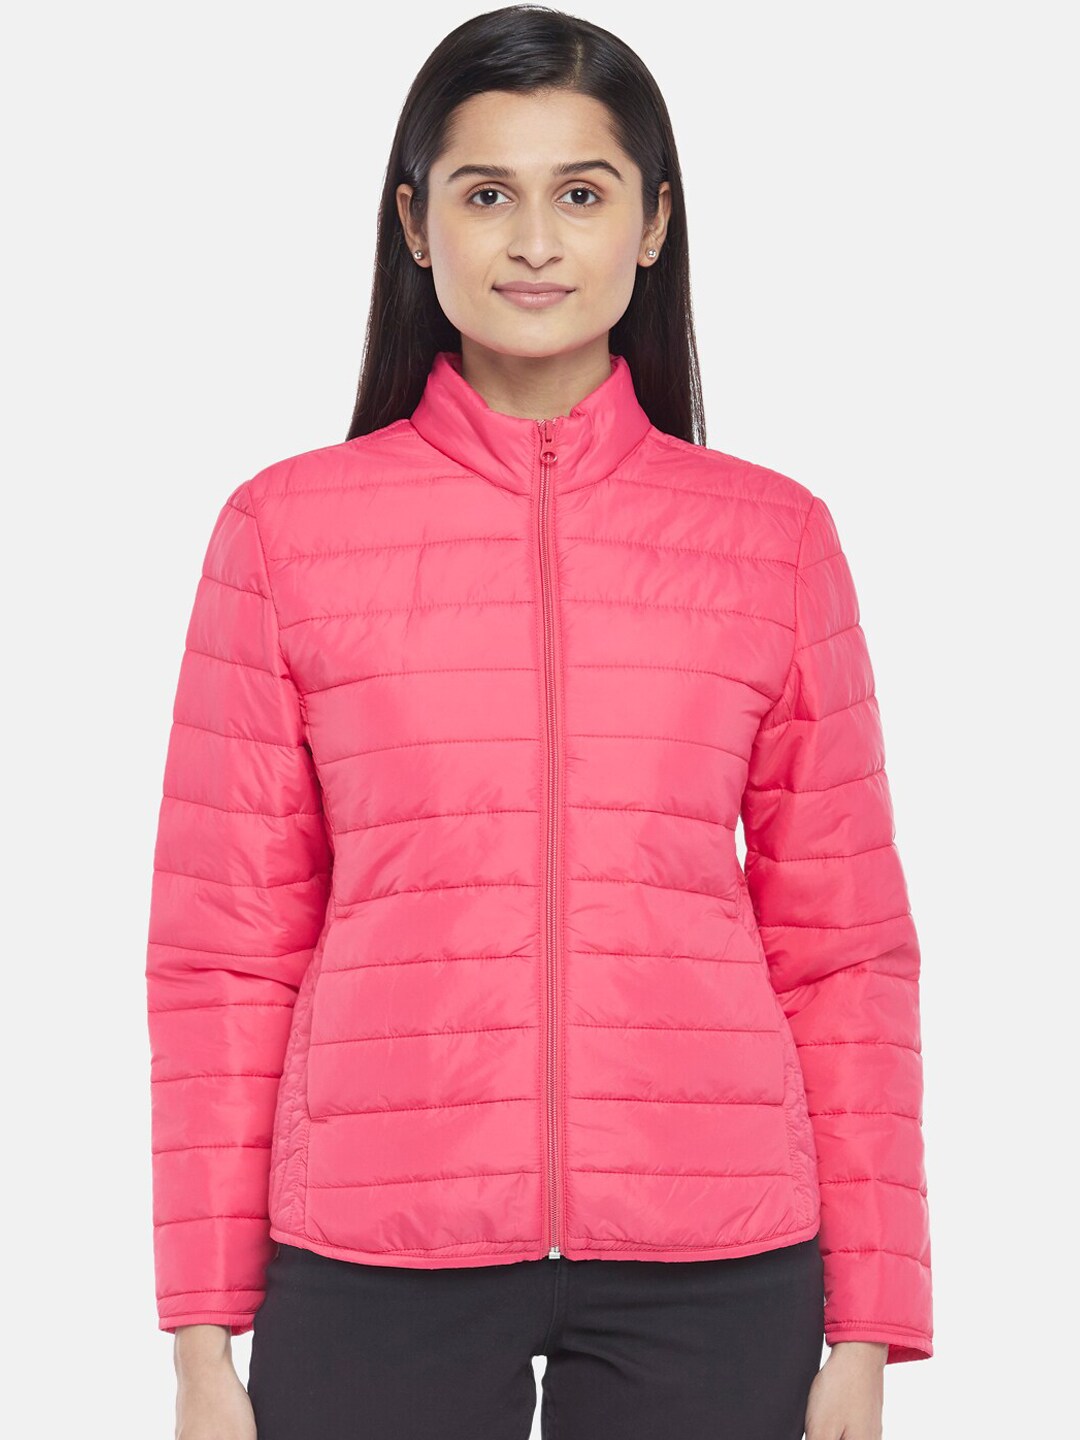 Honey by Pantaloons Women Pink Padded Jacket Price in India